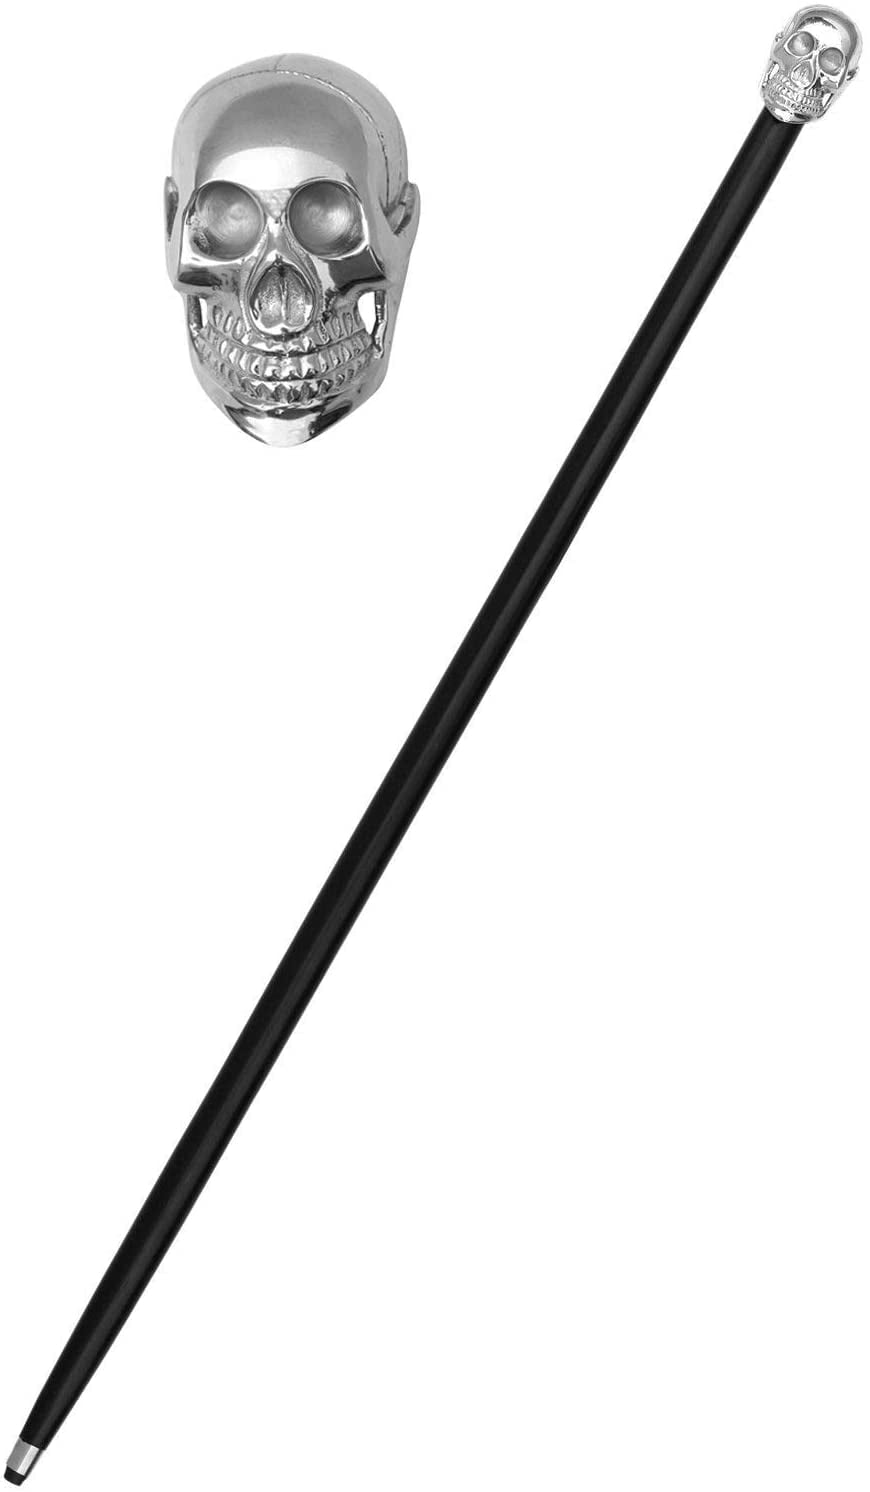 Wooden Black Decorative Walking Cane with a Nickel Plated canes Walking Stick 